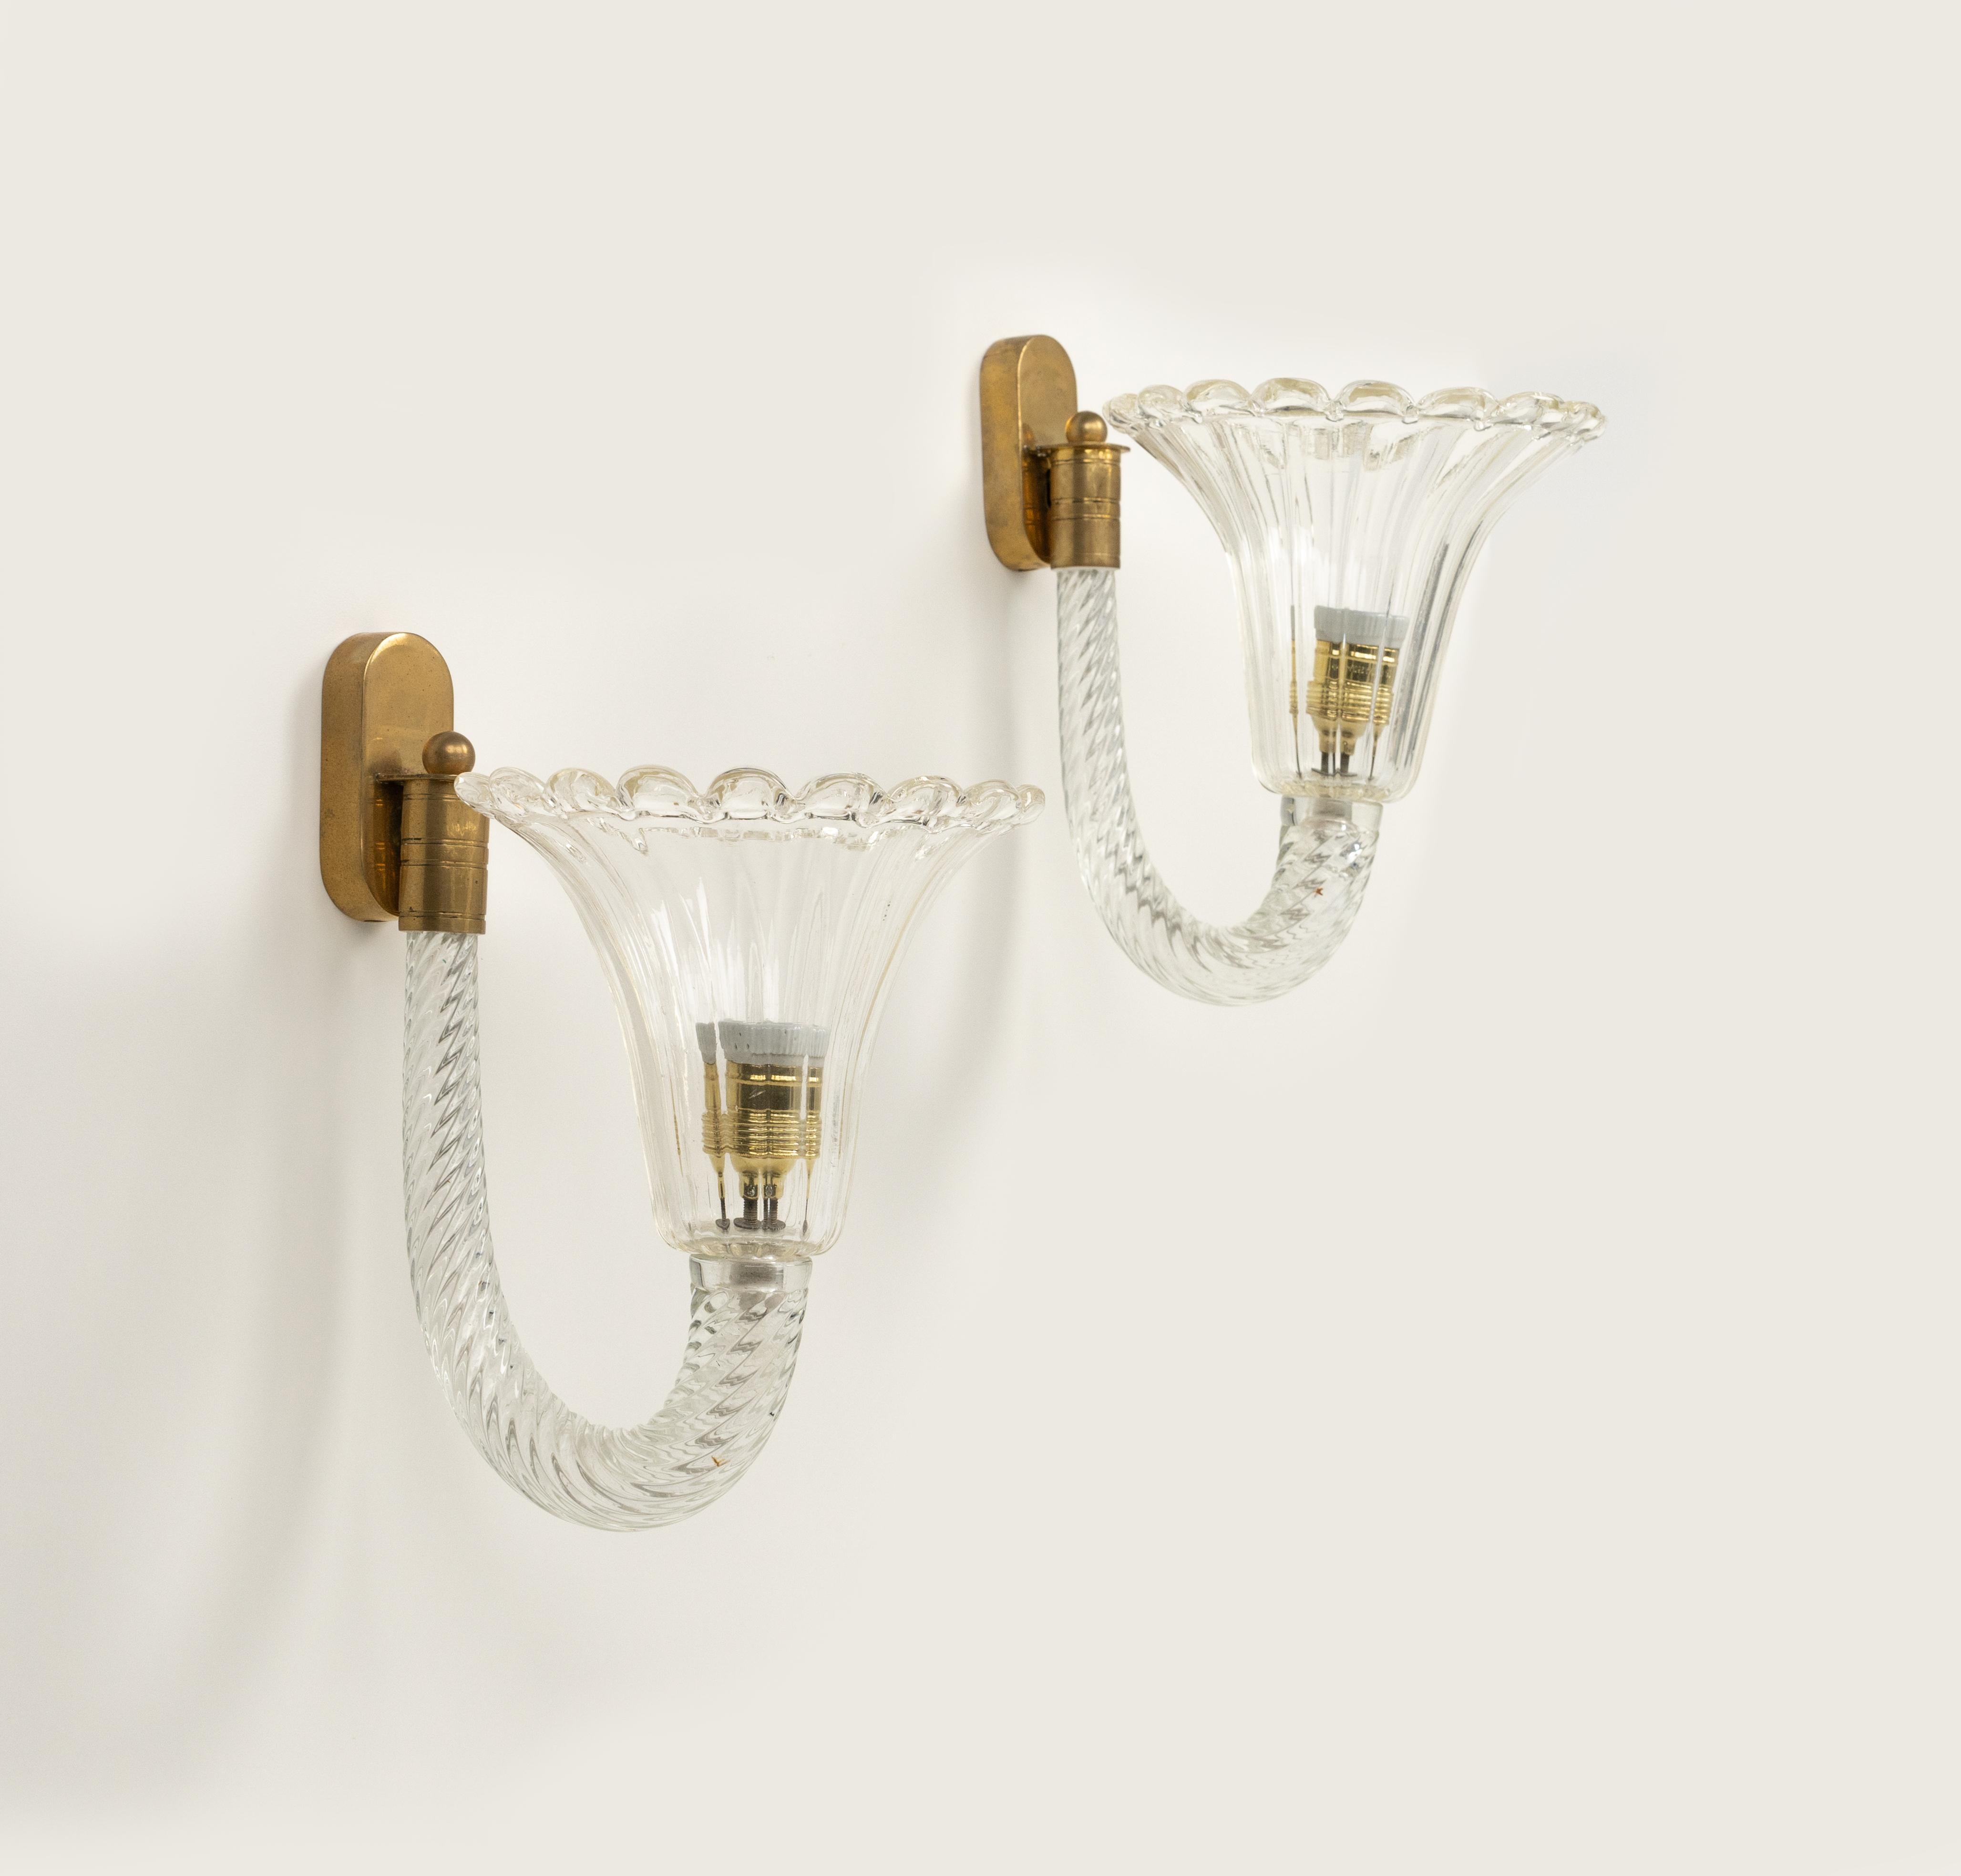 Italian Pair of Sconces Murano Glass & Brass Barovier & Toso Style, Italy 1950s For Sale